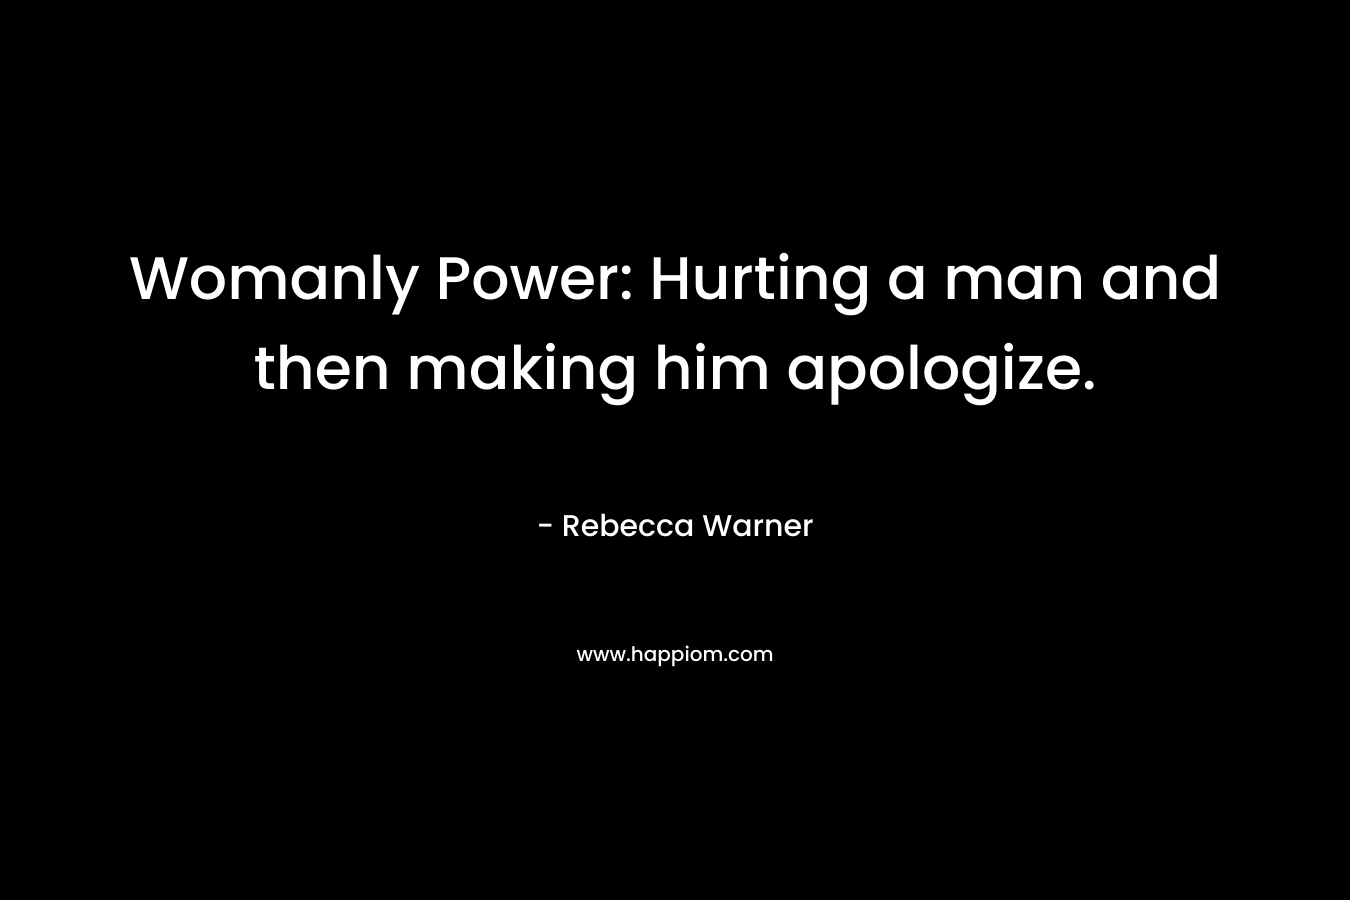 Womanly Power: Hurting a man and then making him apologize.